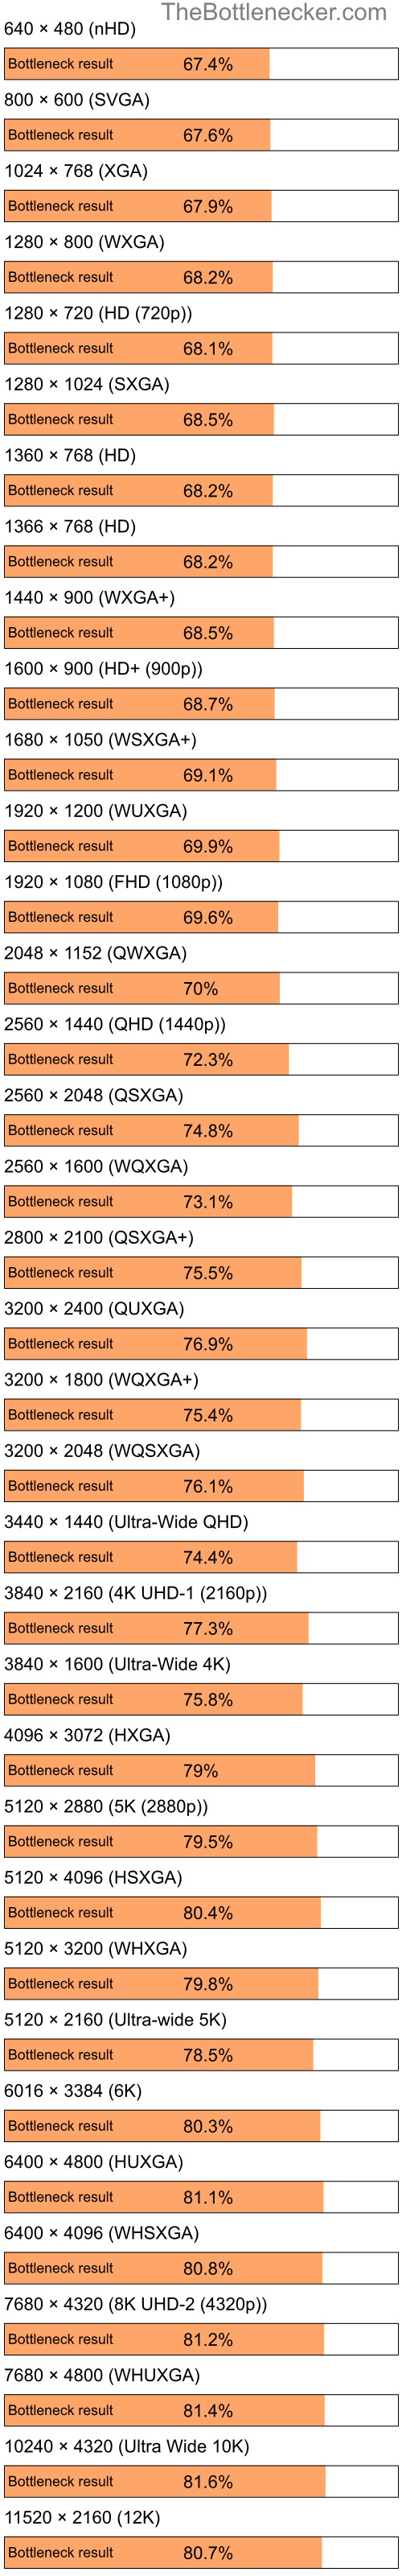 Bottleneck results by resolution for Intel Pentium 4 and AMD Mobility Radeon X600 in Processor Intense Tasks